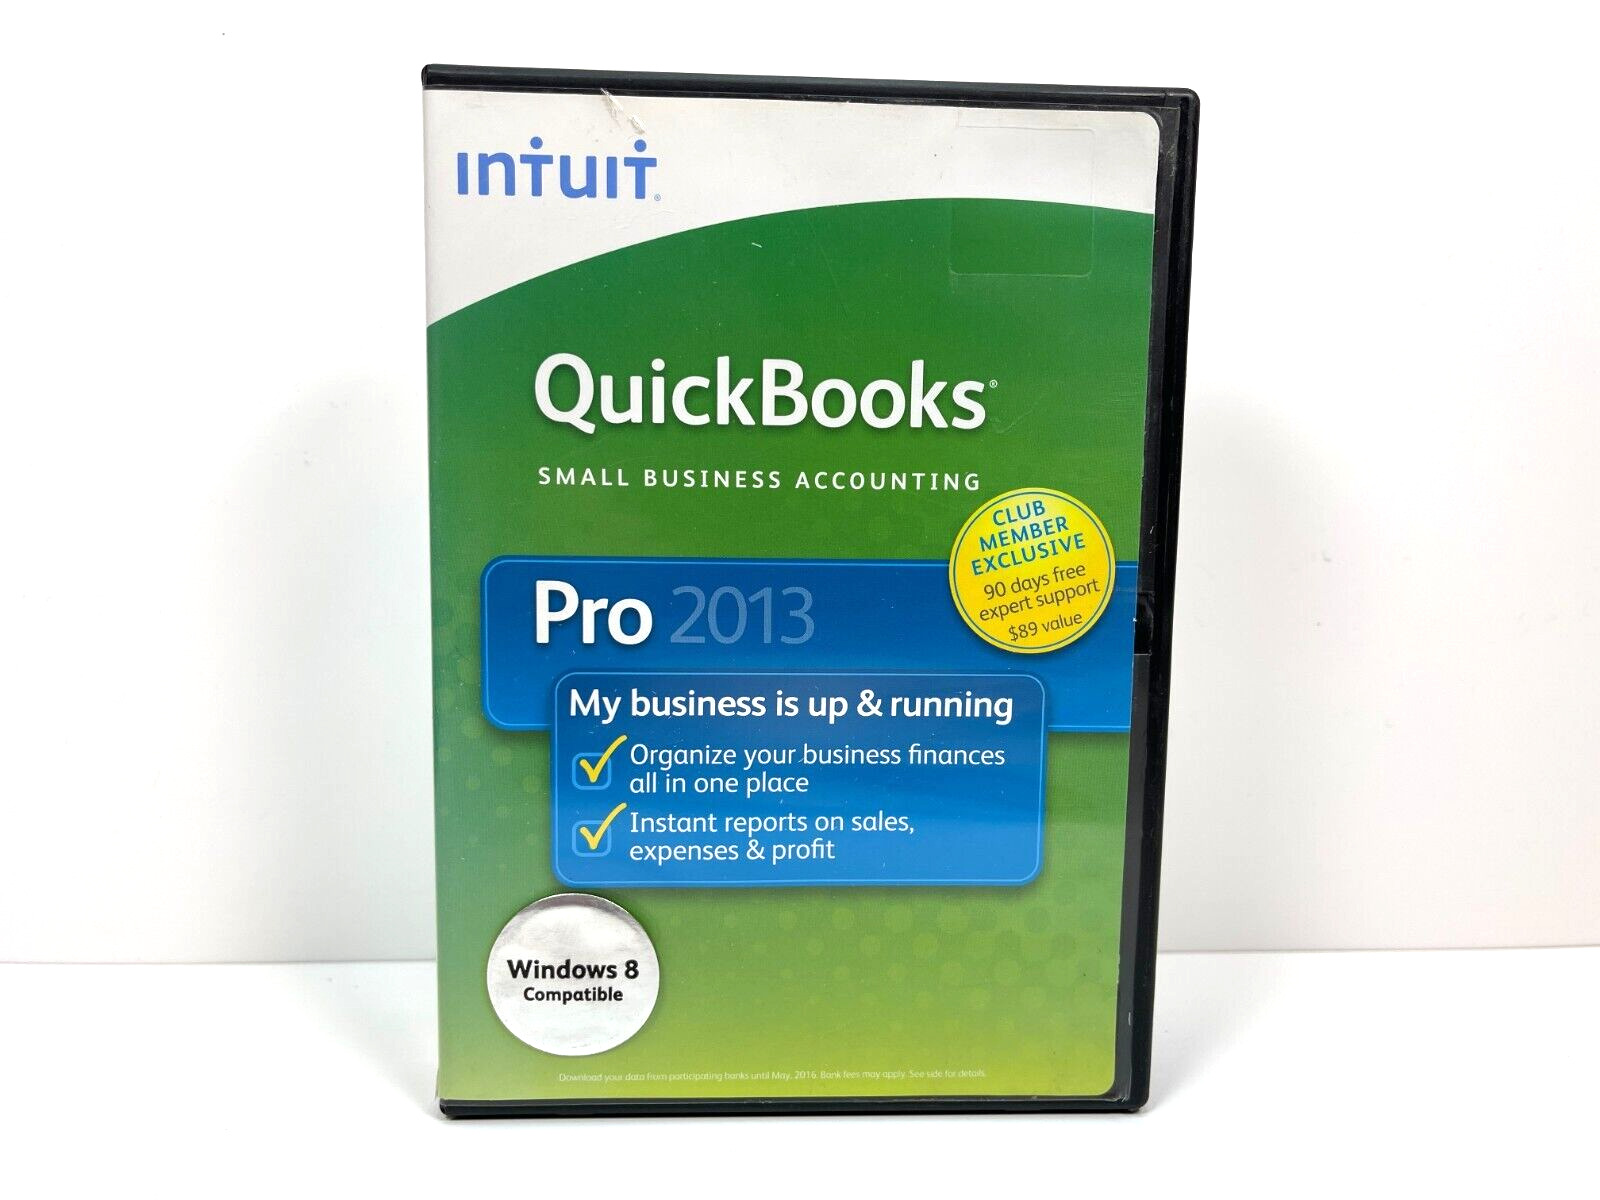 Intuit QuickBooks Pro 2013 Small Business Accounting Software